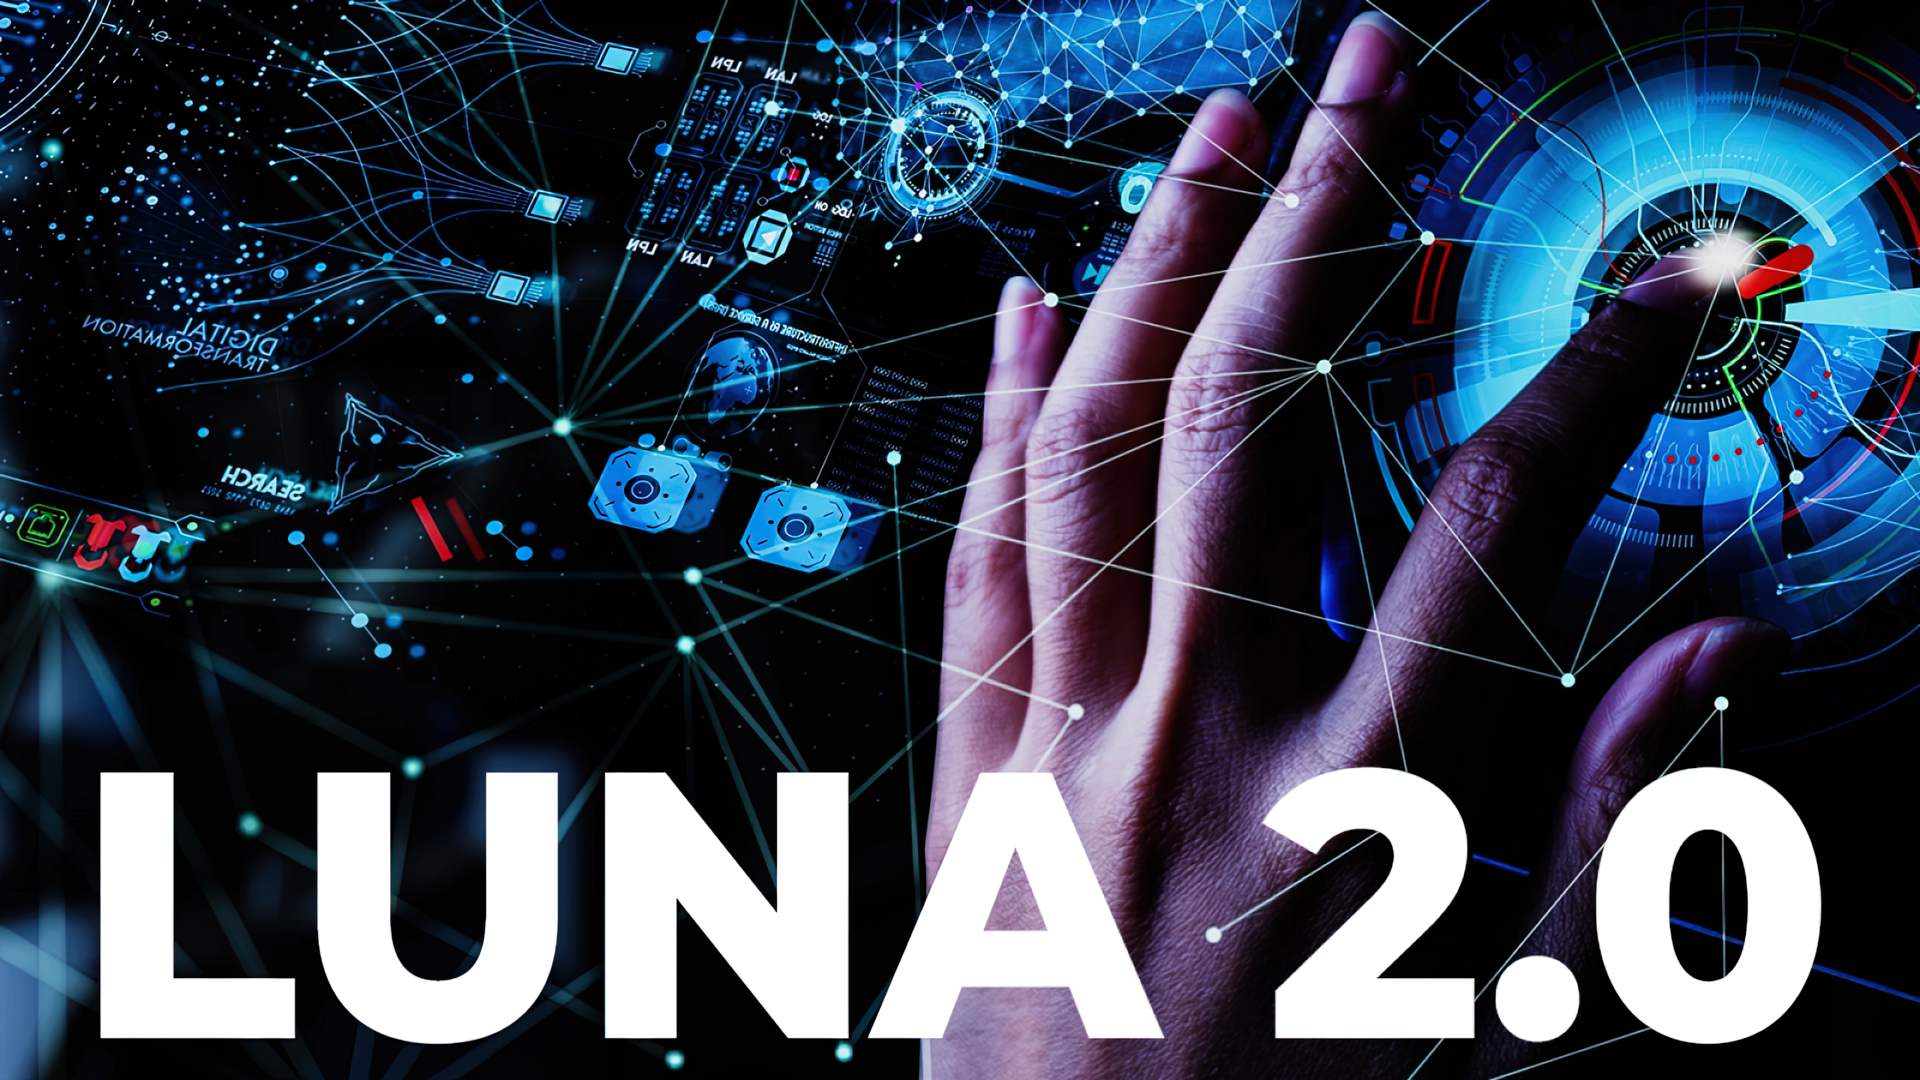 In this article, we will go over our Luna 2.0 price prediction, as well as the frequently asked questions, so you can see if you want to invest in this coin.